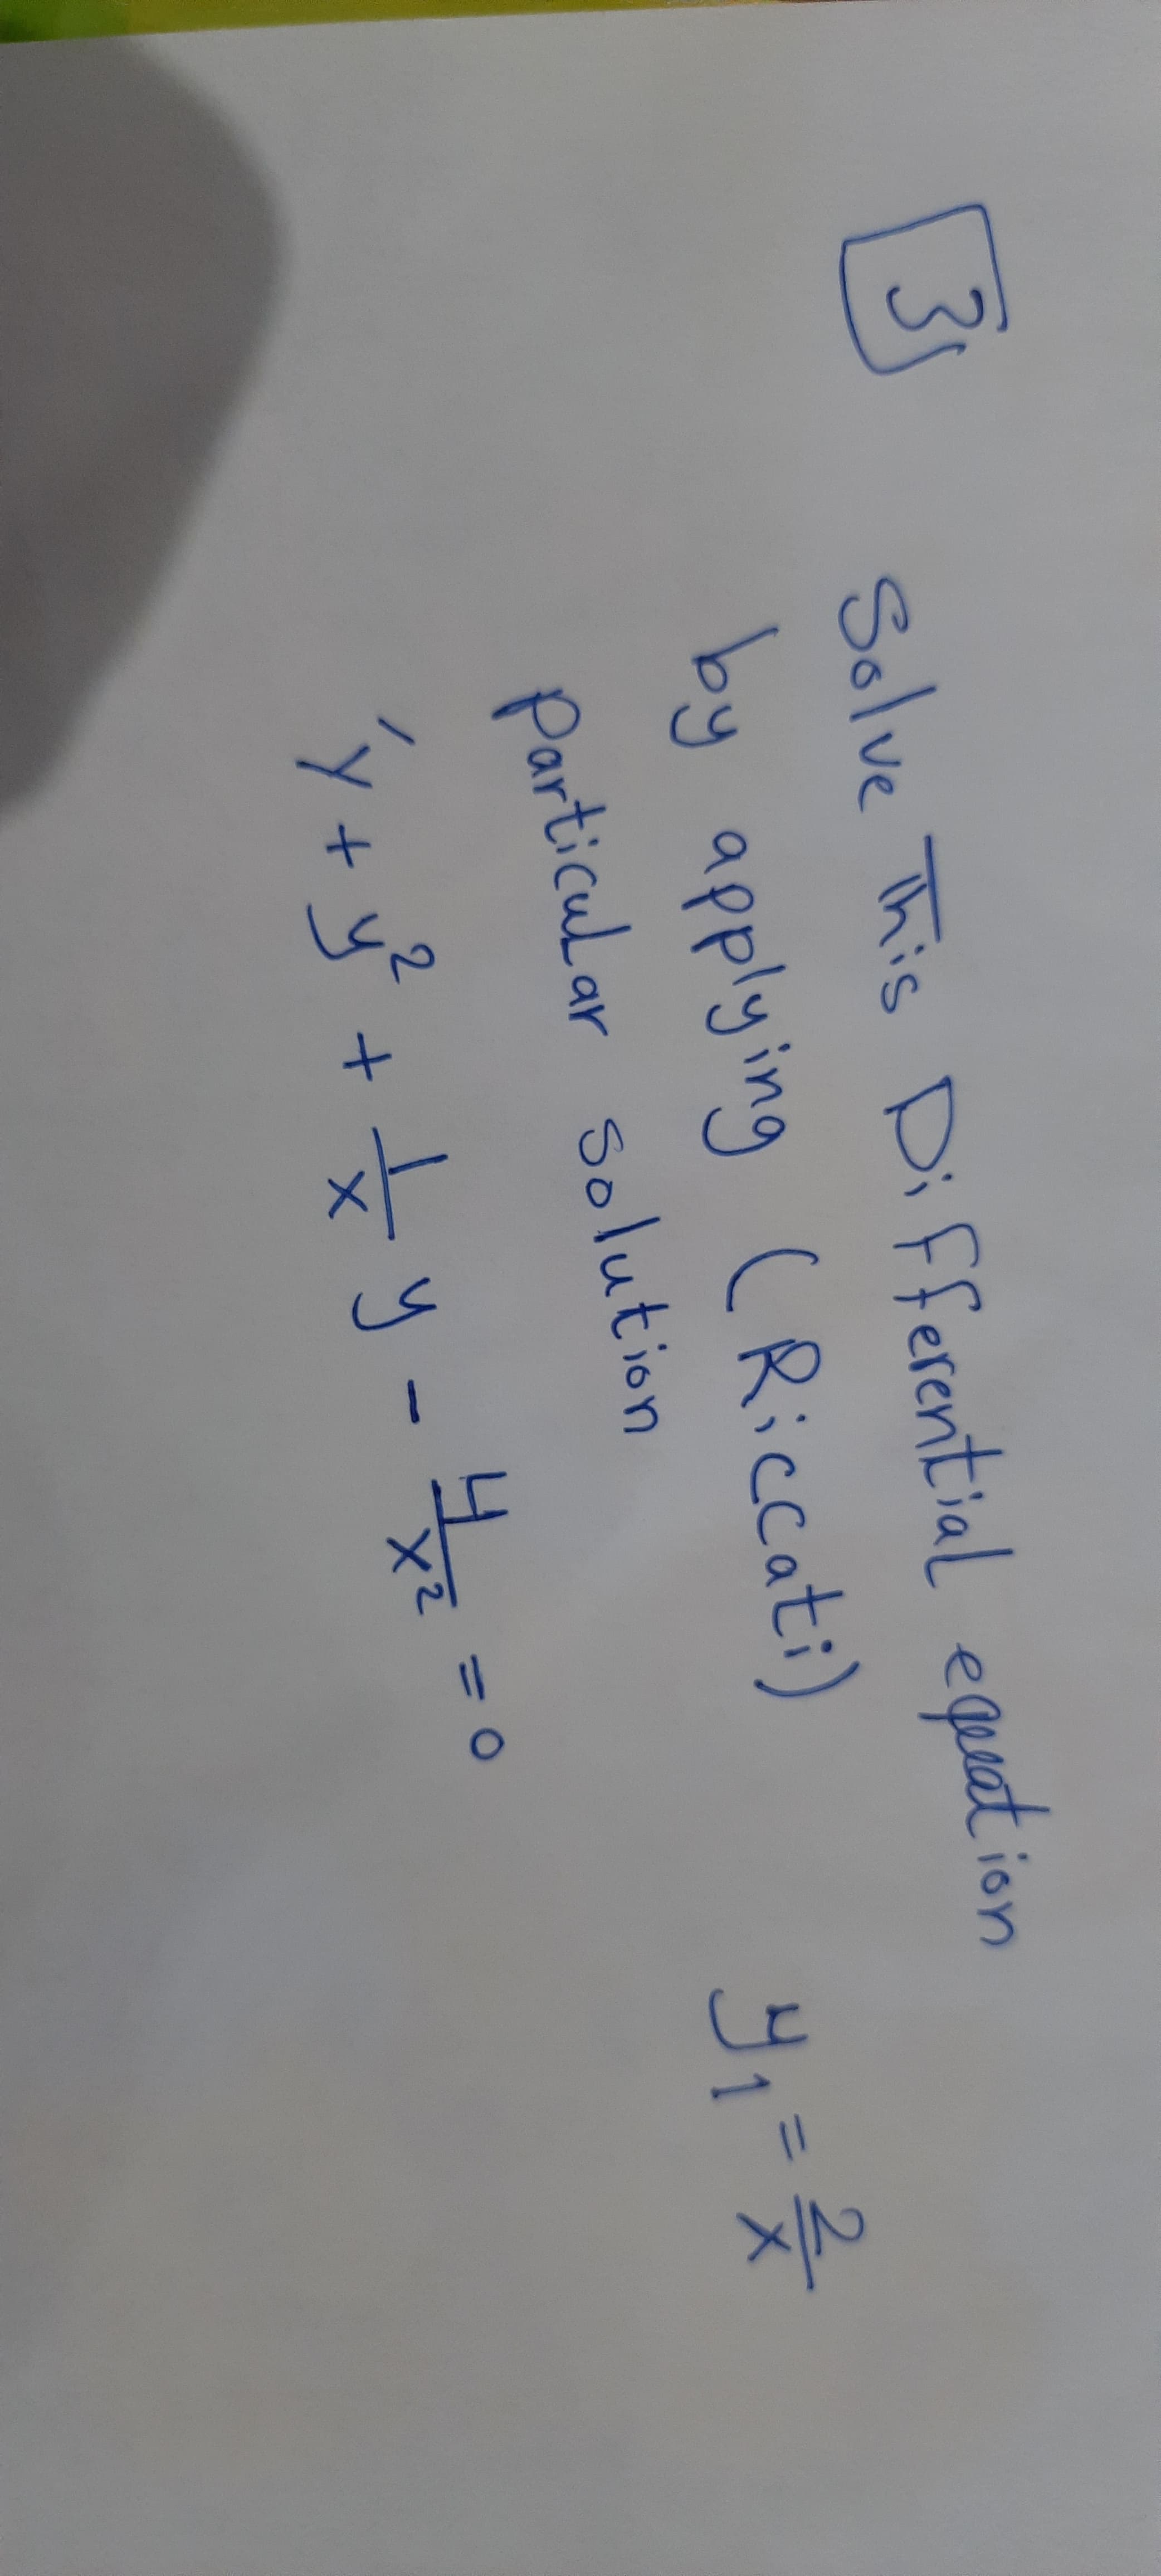 applying
3
Solve This Di fferential equsat ion
by applying CRiccati)
Particular
Solution
2.
Y
4.
y
%3D
